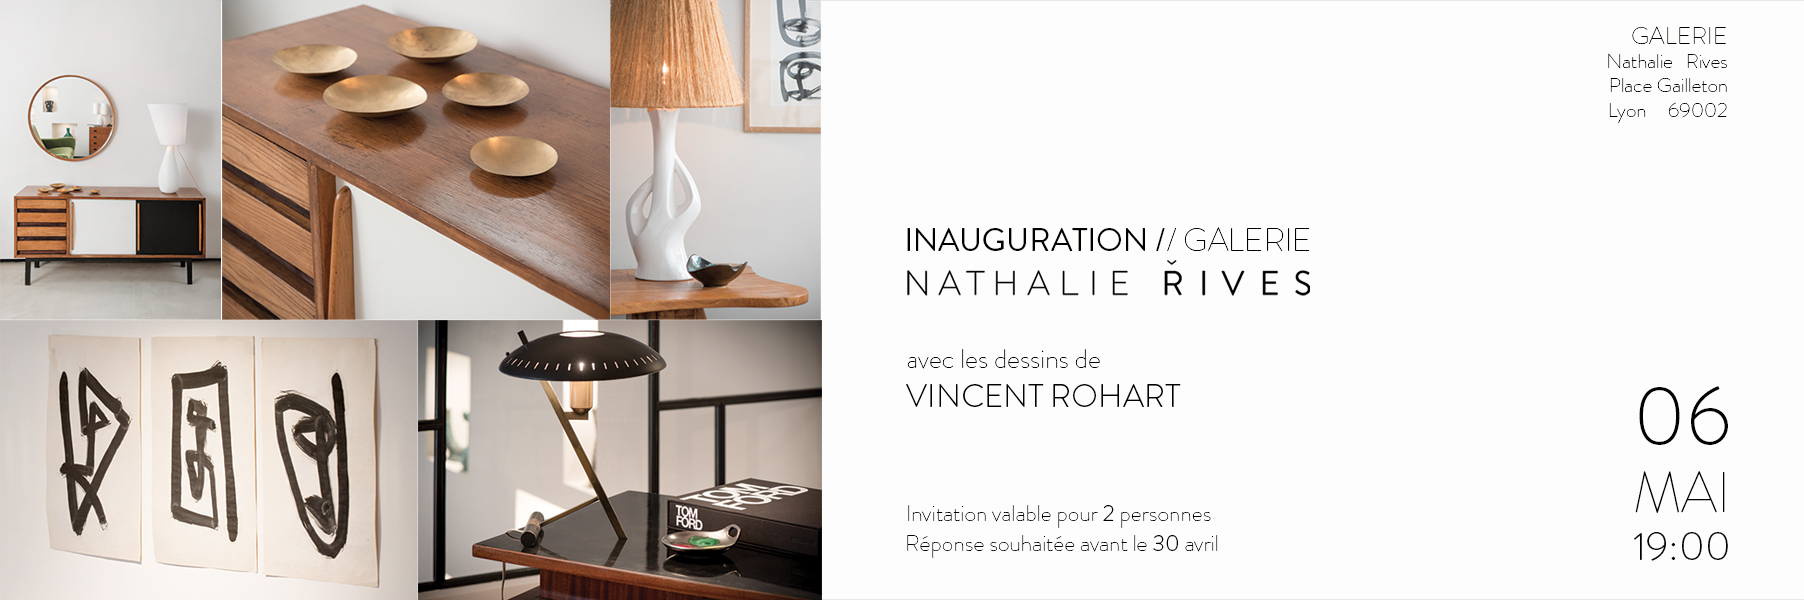 Inauguration Galerie Nathalie Rives